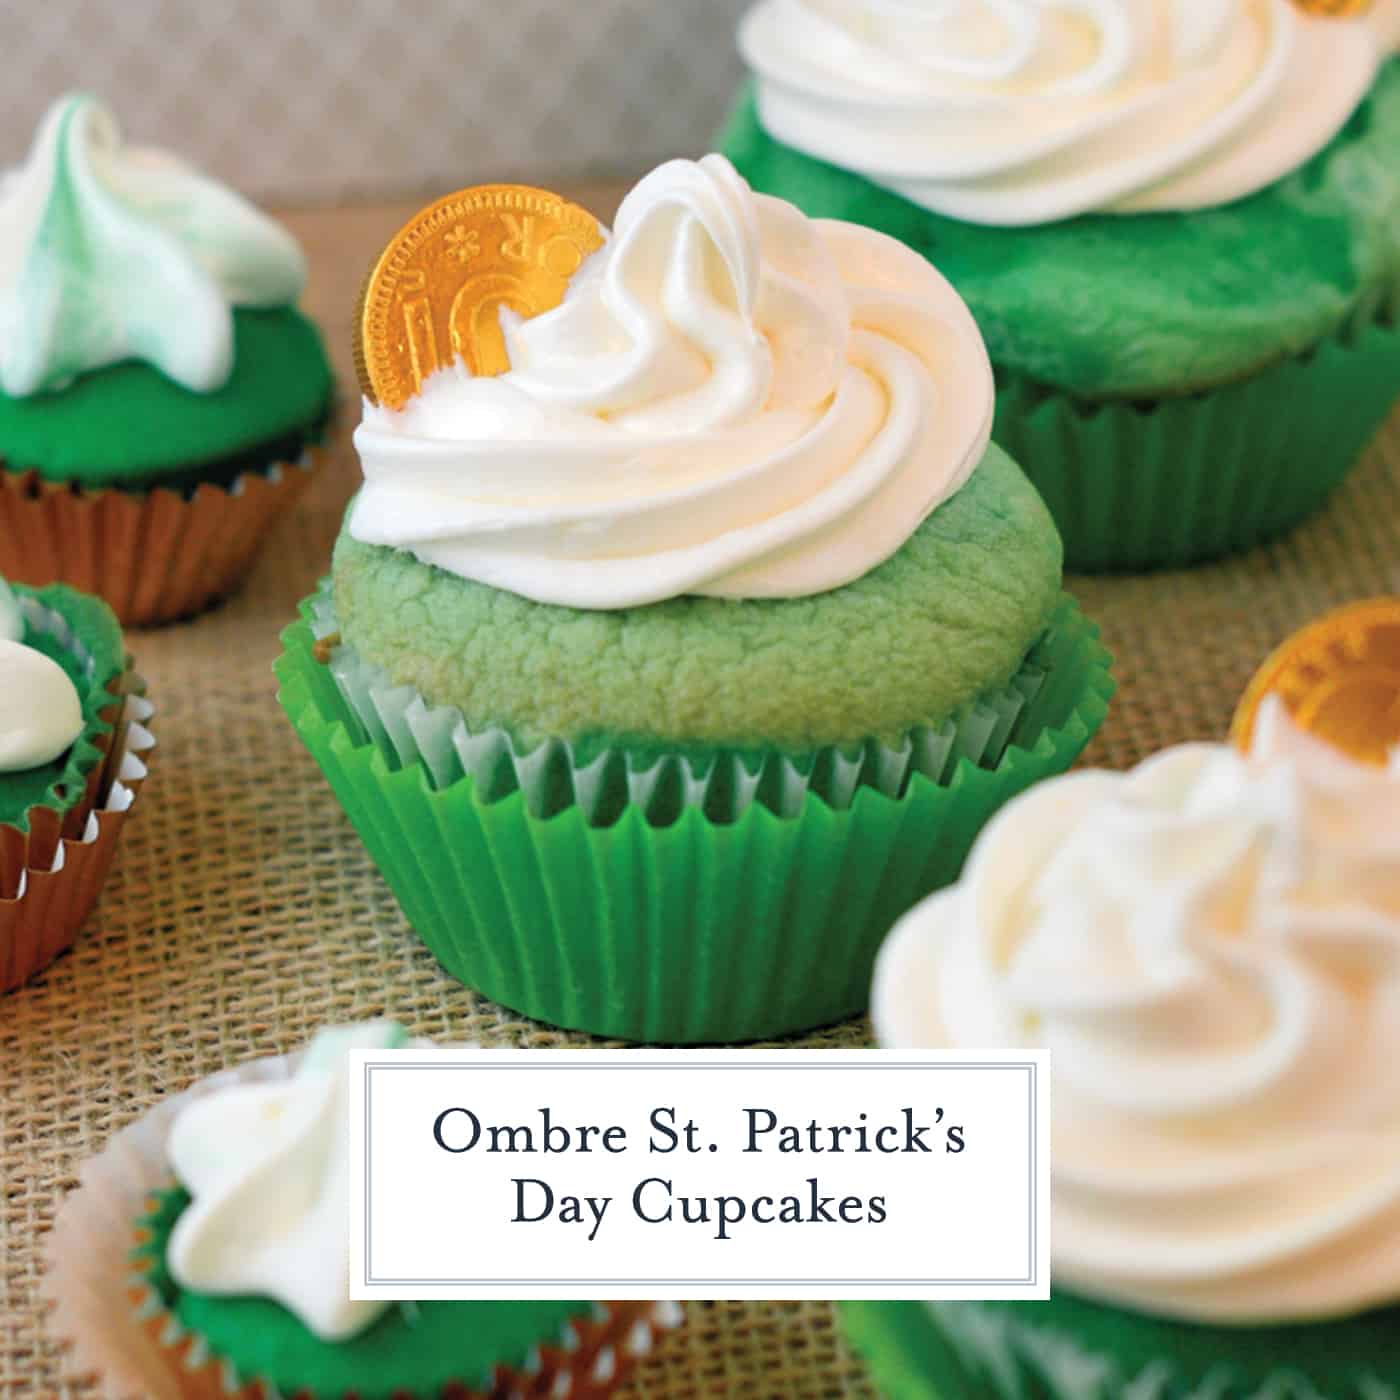 St. Patrick's Day Cupcakes in ombre style. Three shades of green and a whipped frosting. Perfect for your St. Patrick's Day Party! #stpatricksdaycupcakes #stpatricksdaydessert www.savoryexperiments.com